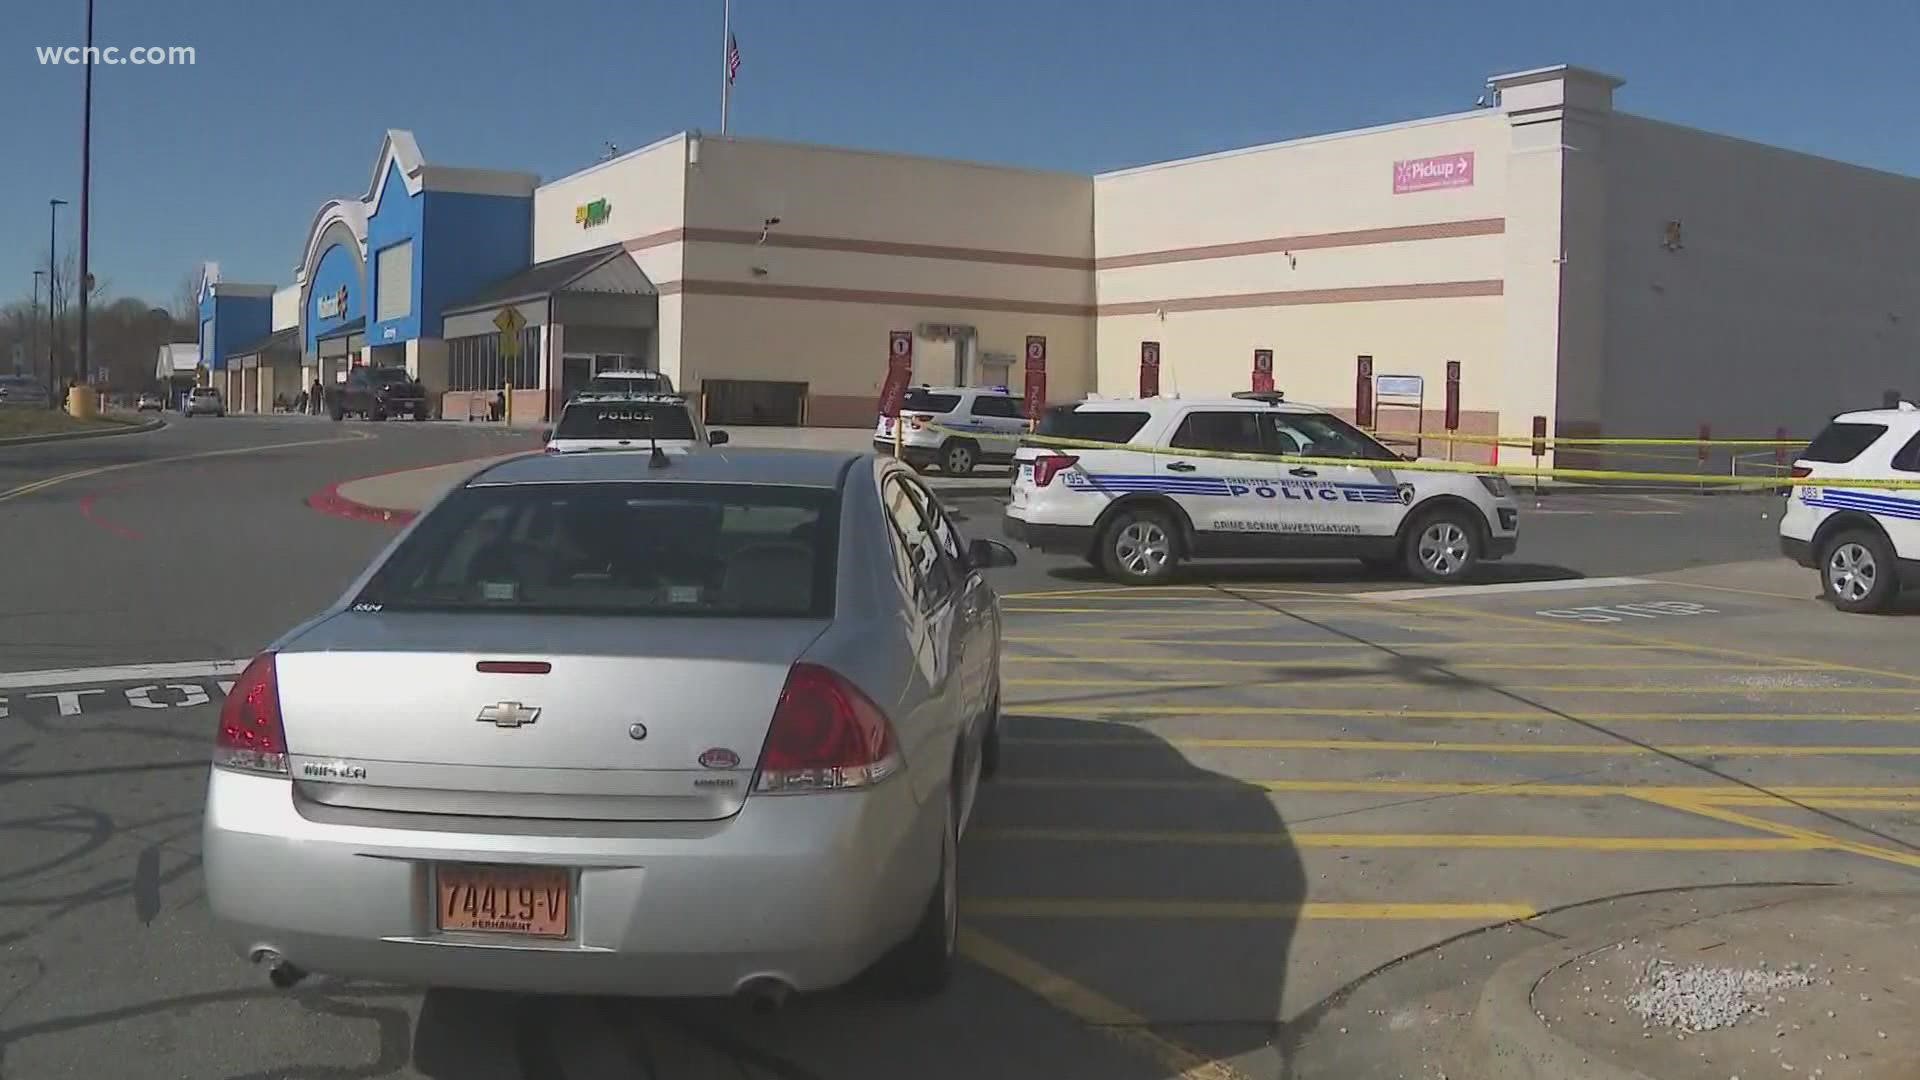 Charlotte-Mecklenburg police are investigating	after a security guard opened fire during a reported assault at a charlotte Walmart.